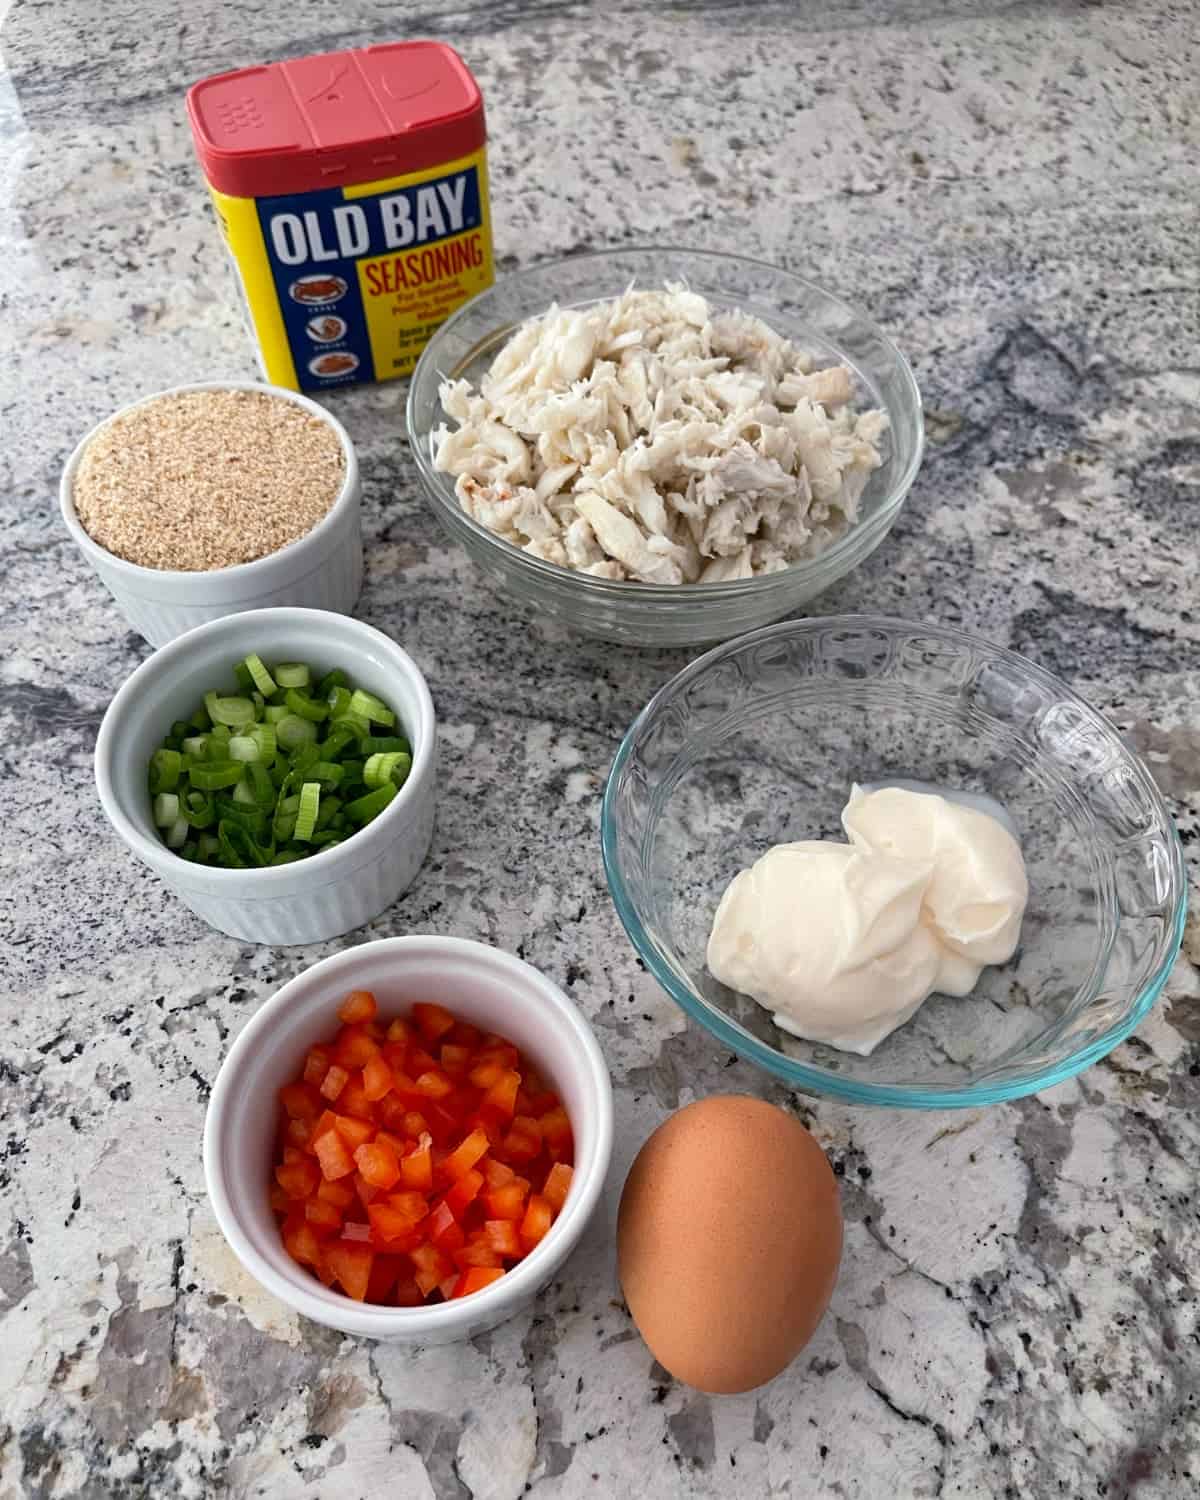 Ingredients including Old Bay seasoning, lump crabmeat, light mayonnaise, egg, diced red bell pepper, sliced green onion and breadcrumbs.